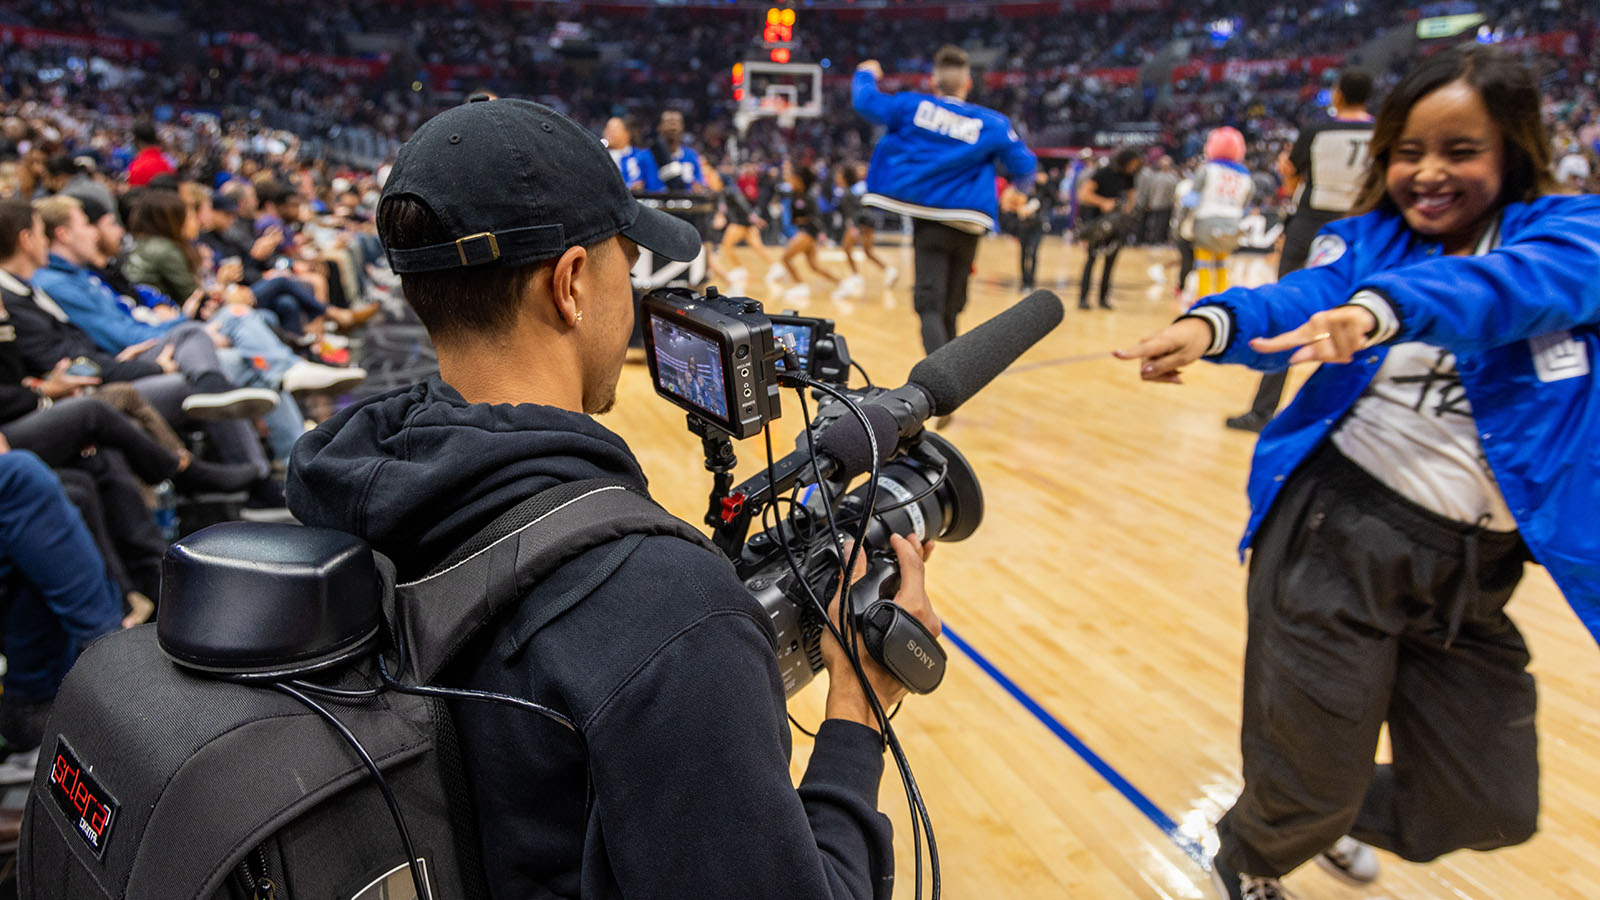 Courtside camera operator at a Clippers game